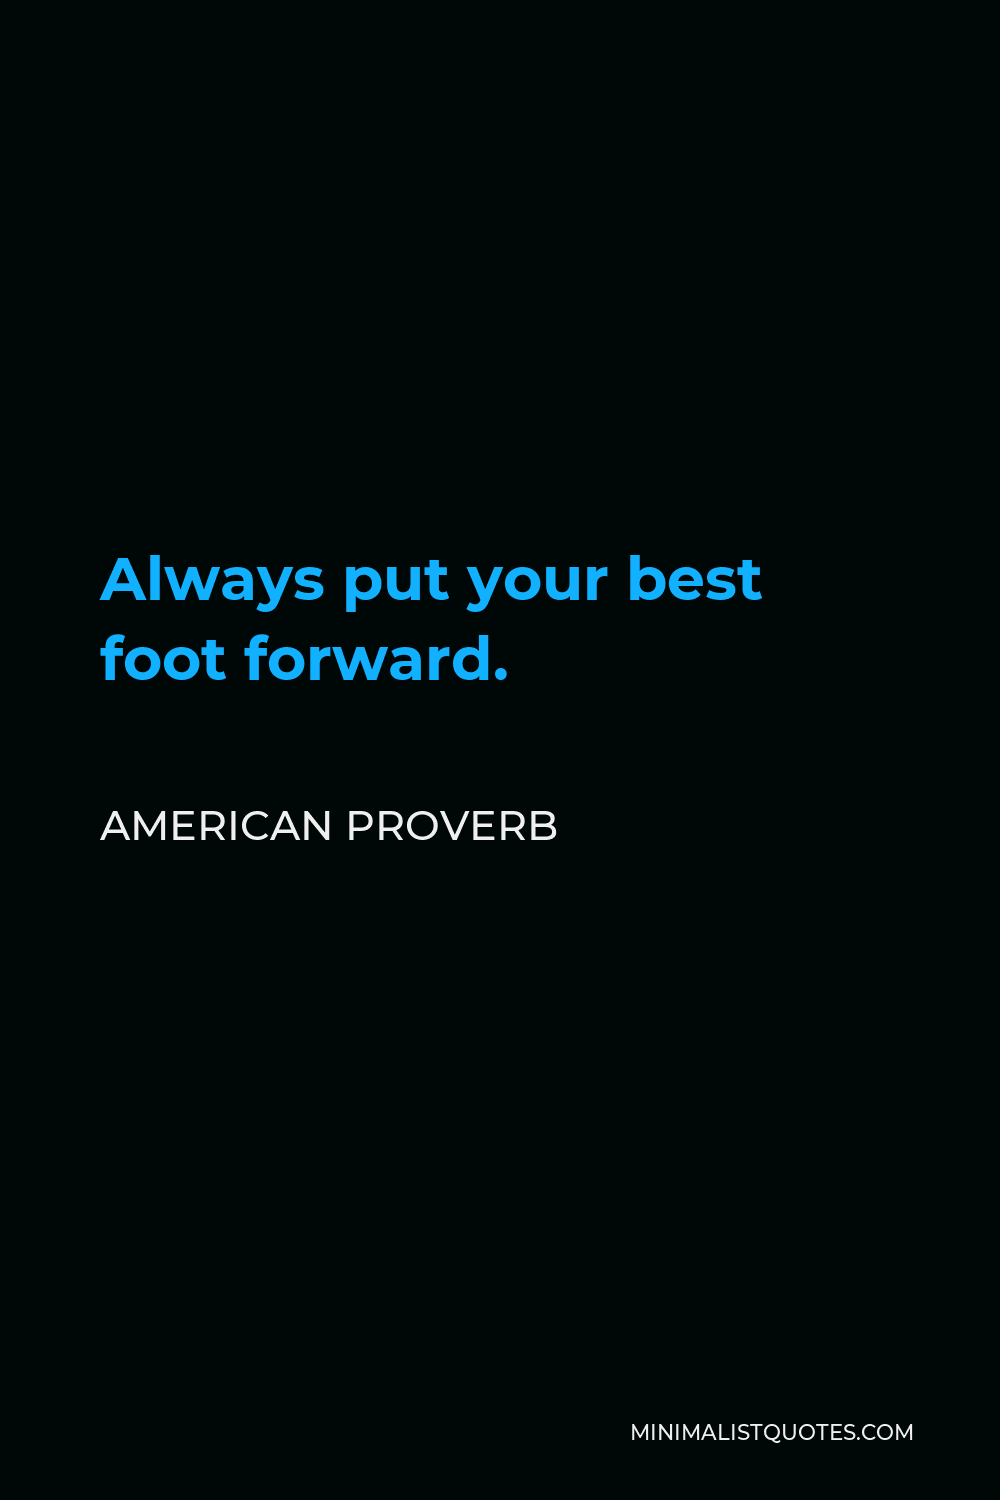 American Proverb Quote - Always put your best foot forward.